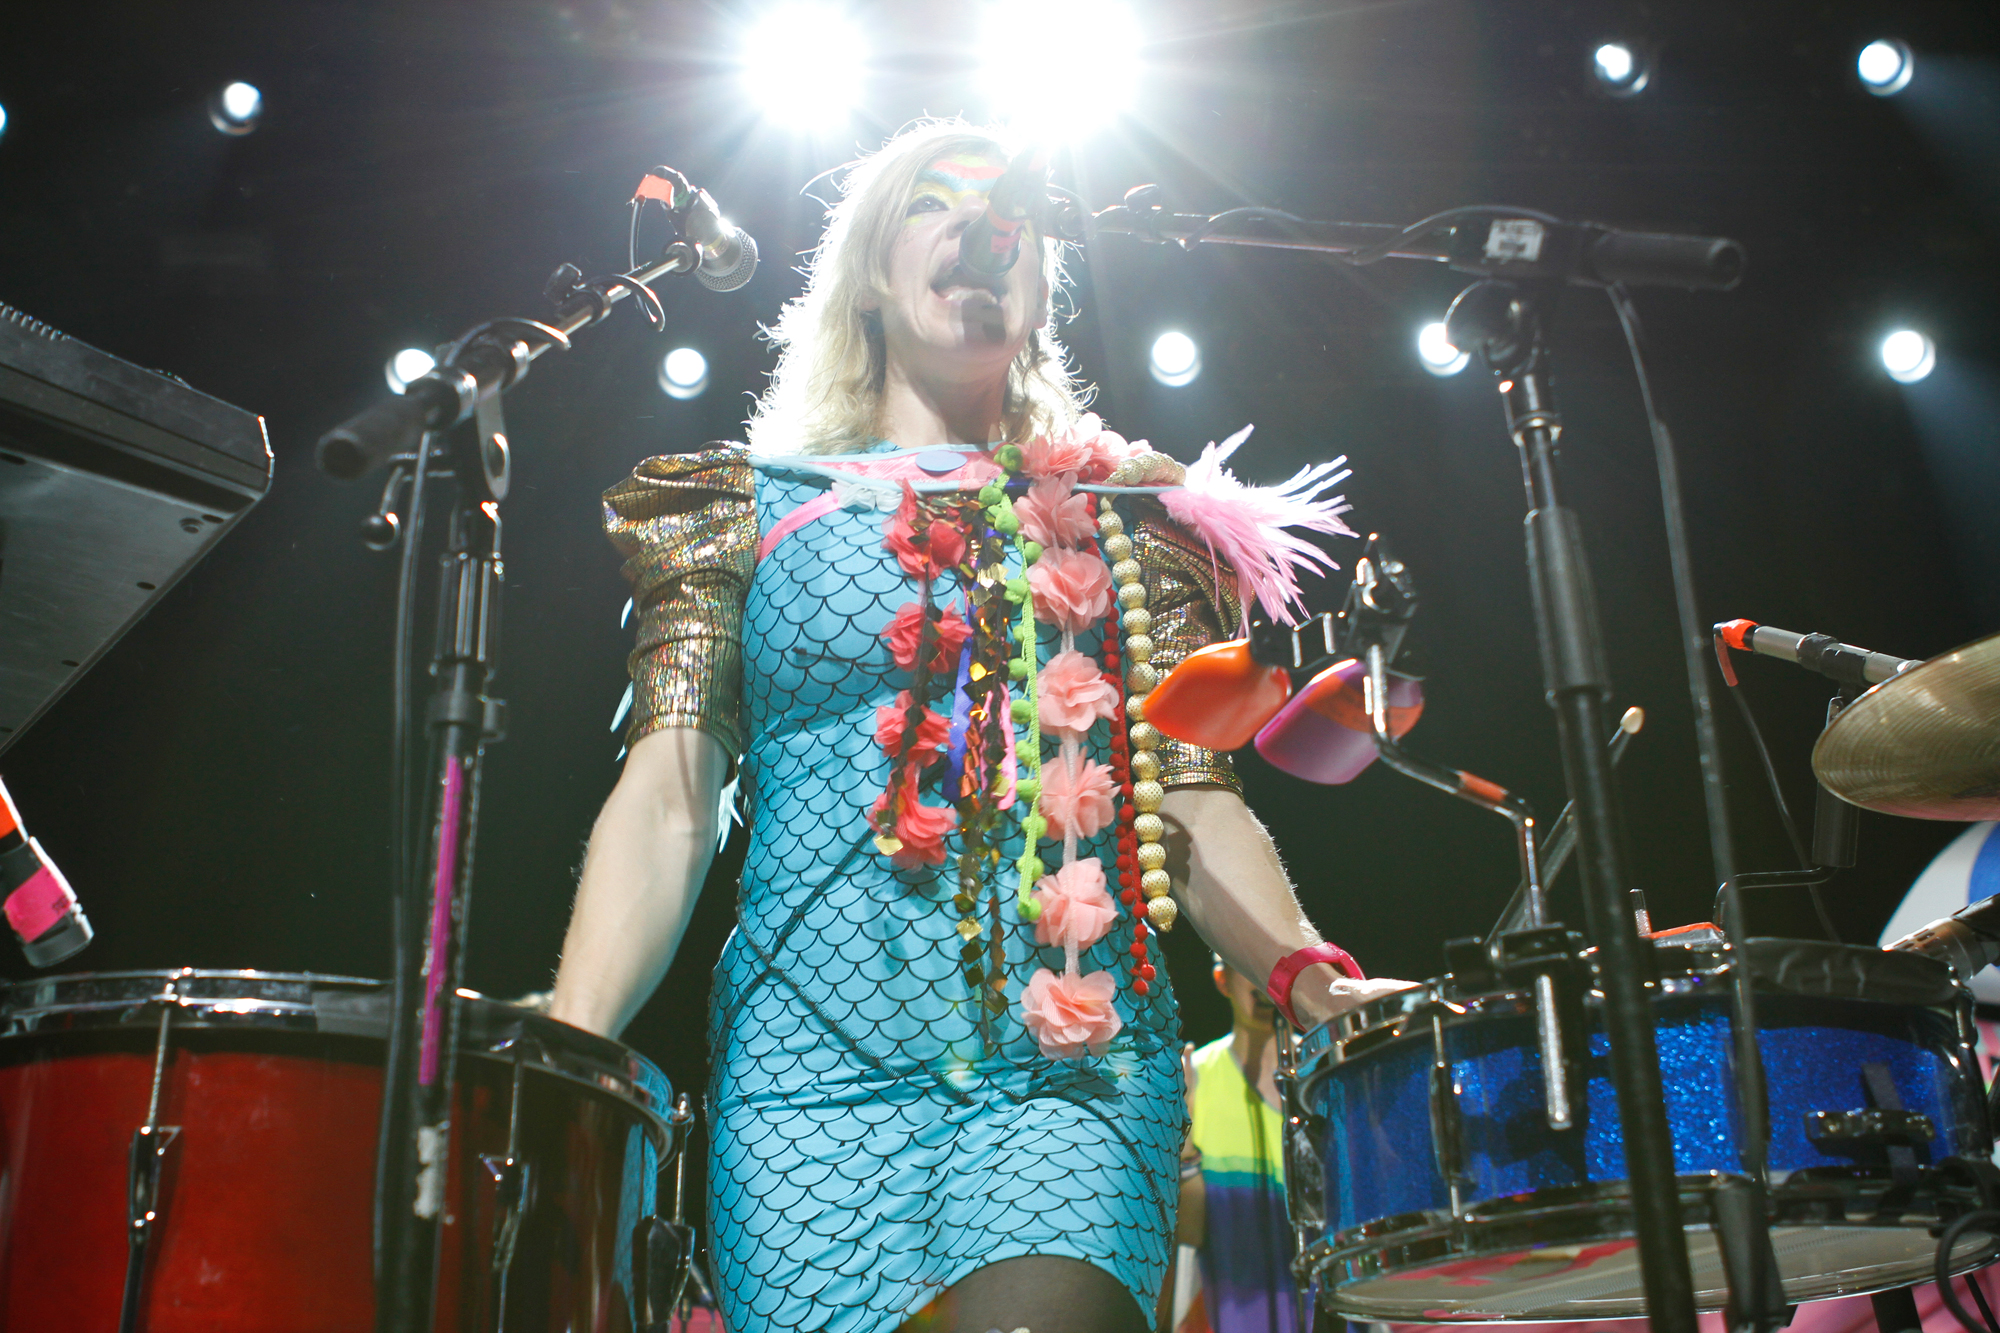 tUnE-yArDs plays at Webster Hall in New York, NY on June 22, 2014.